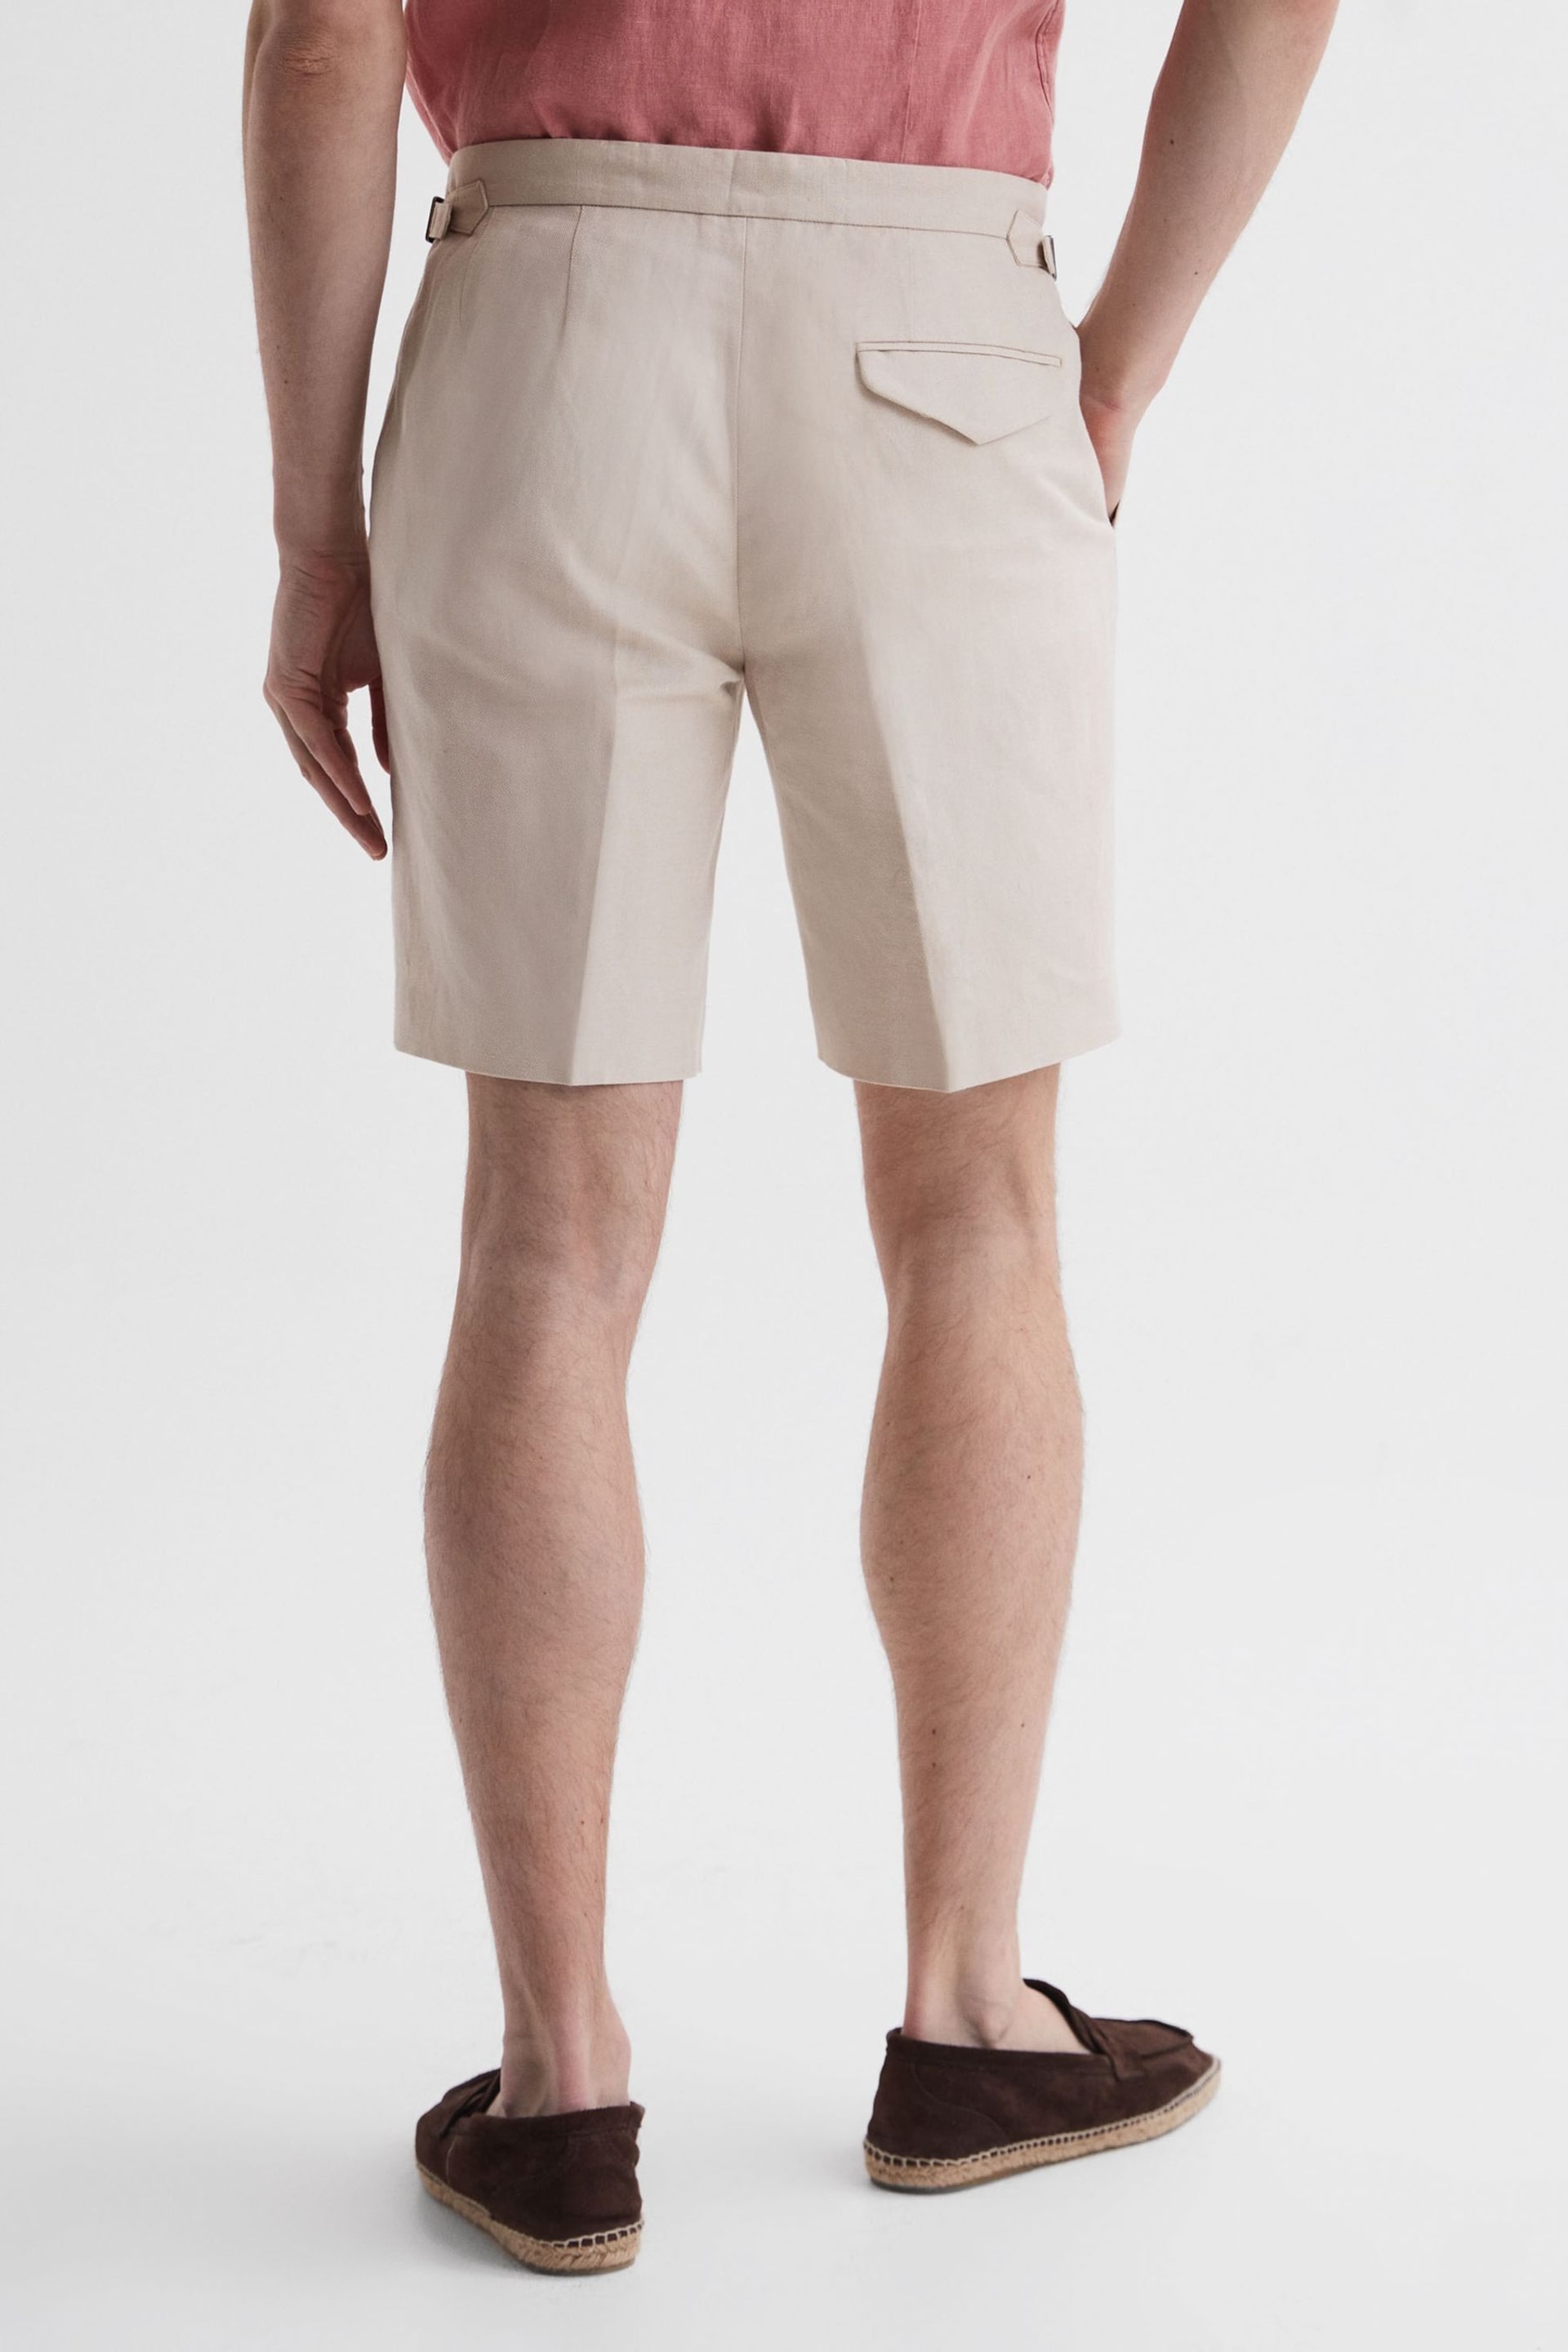 Reiss Stone Path Cotton-Linen Blend Chino Shorts - Image 5 of 6